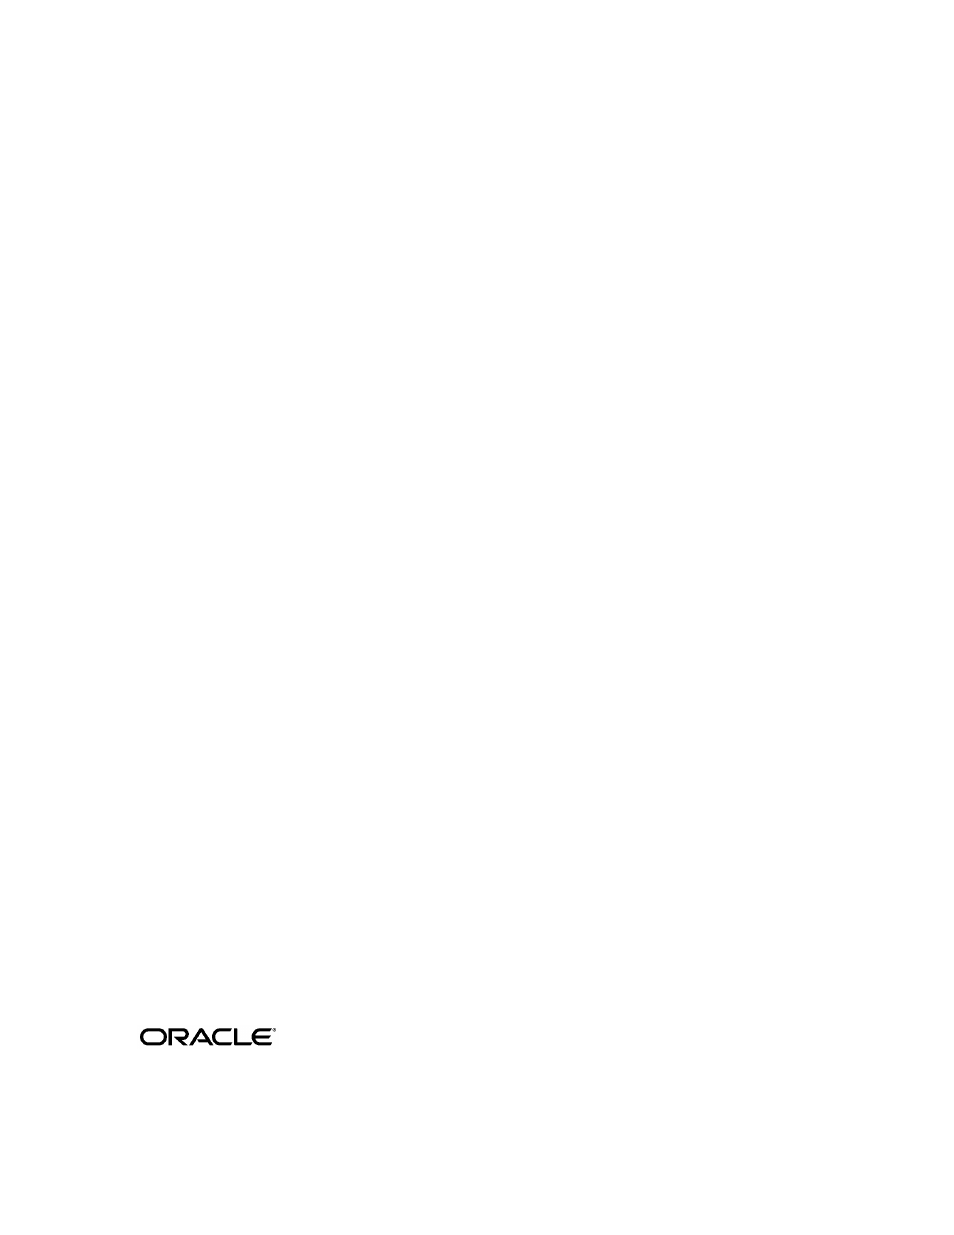 Oracle Audio Technologies Application 9i User Manual | 140 pages